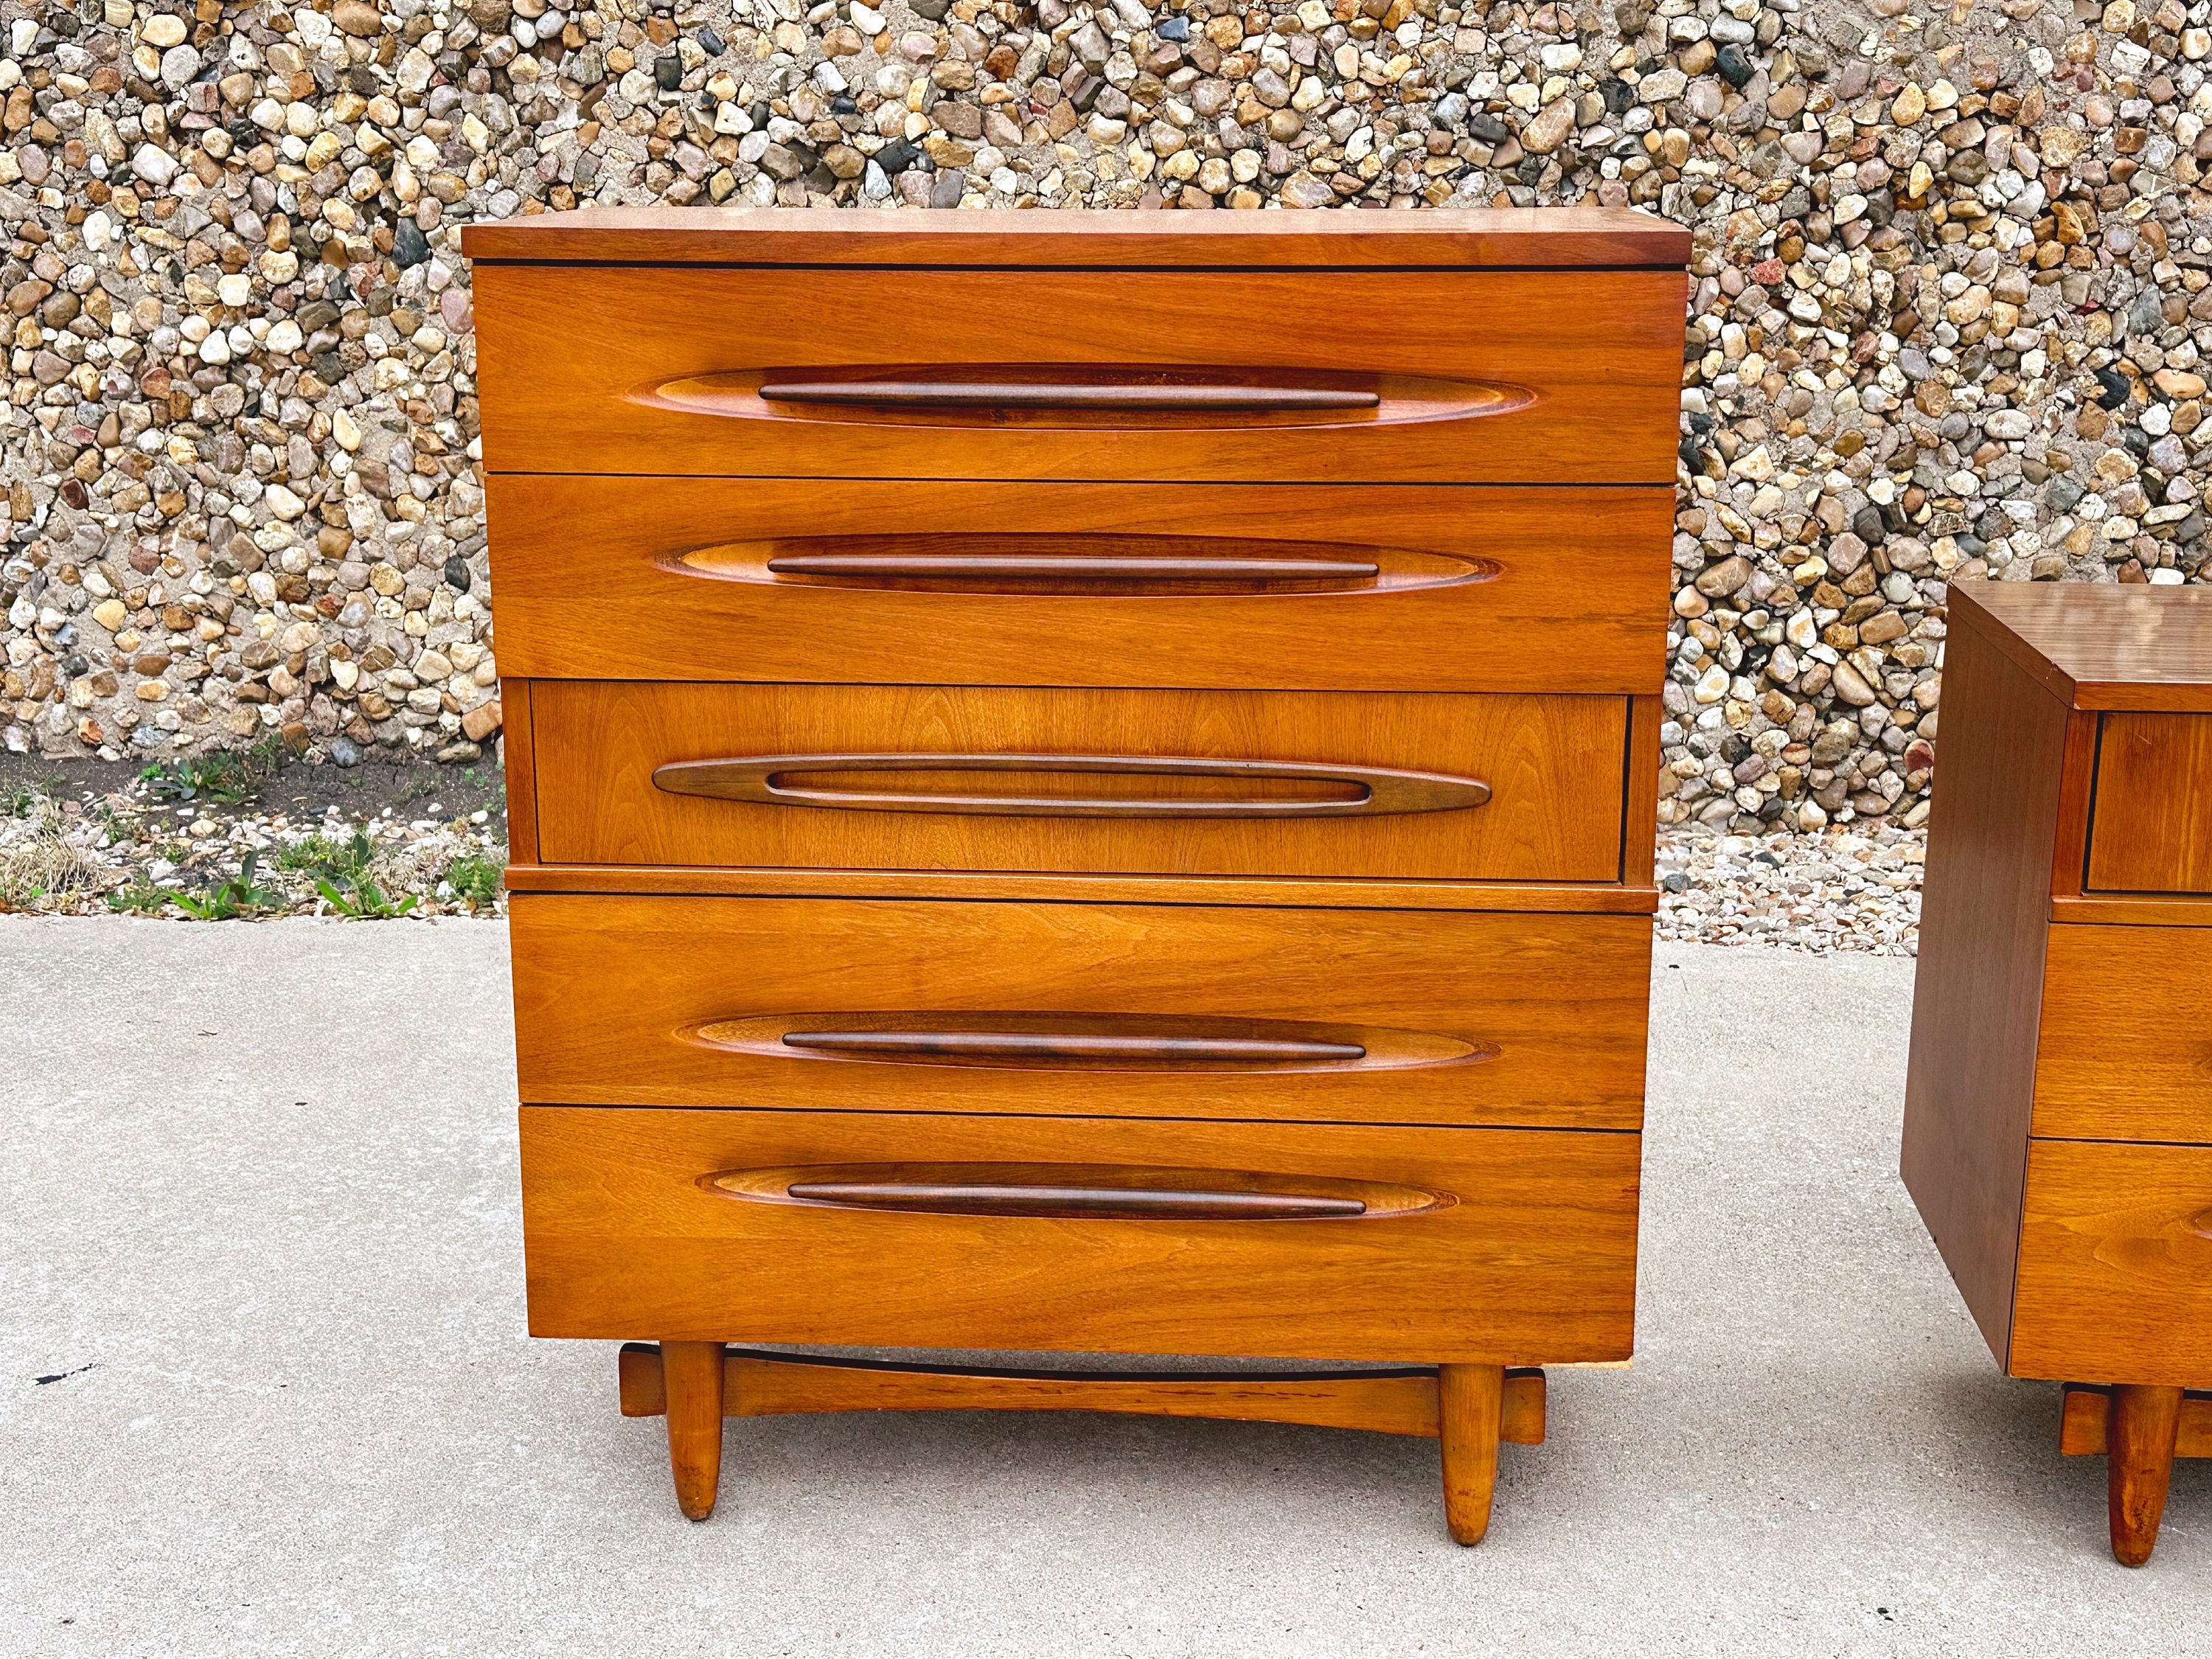 Vintage Mid Century Modern 5-Drawer Tallboy Dresser by Ward Furniture Mfg Co | SHIPPING NOT FREE | Bedroom Furniture Chest of Drawers